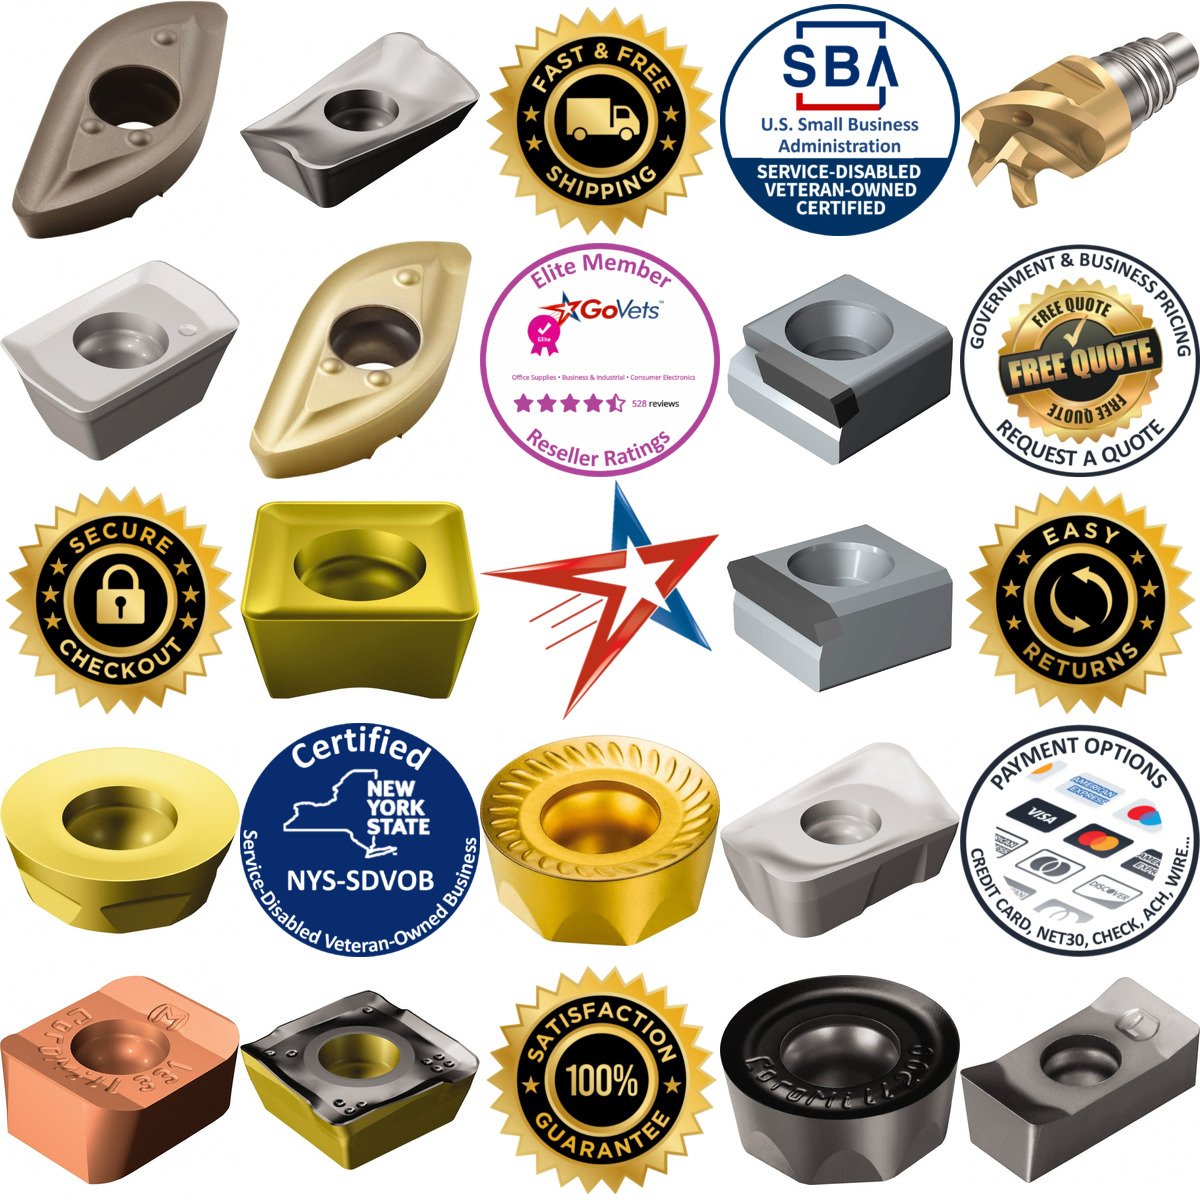 A selection of Modular Turning and Profiling Cutting Unit Heads products on GoVets